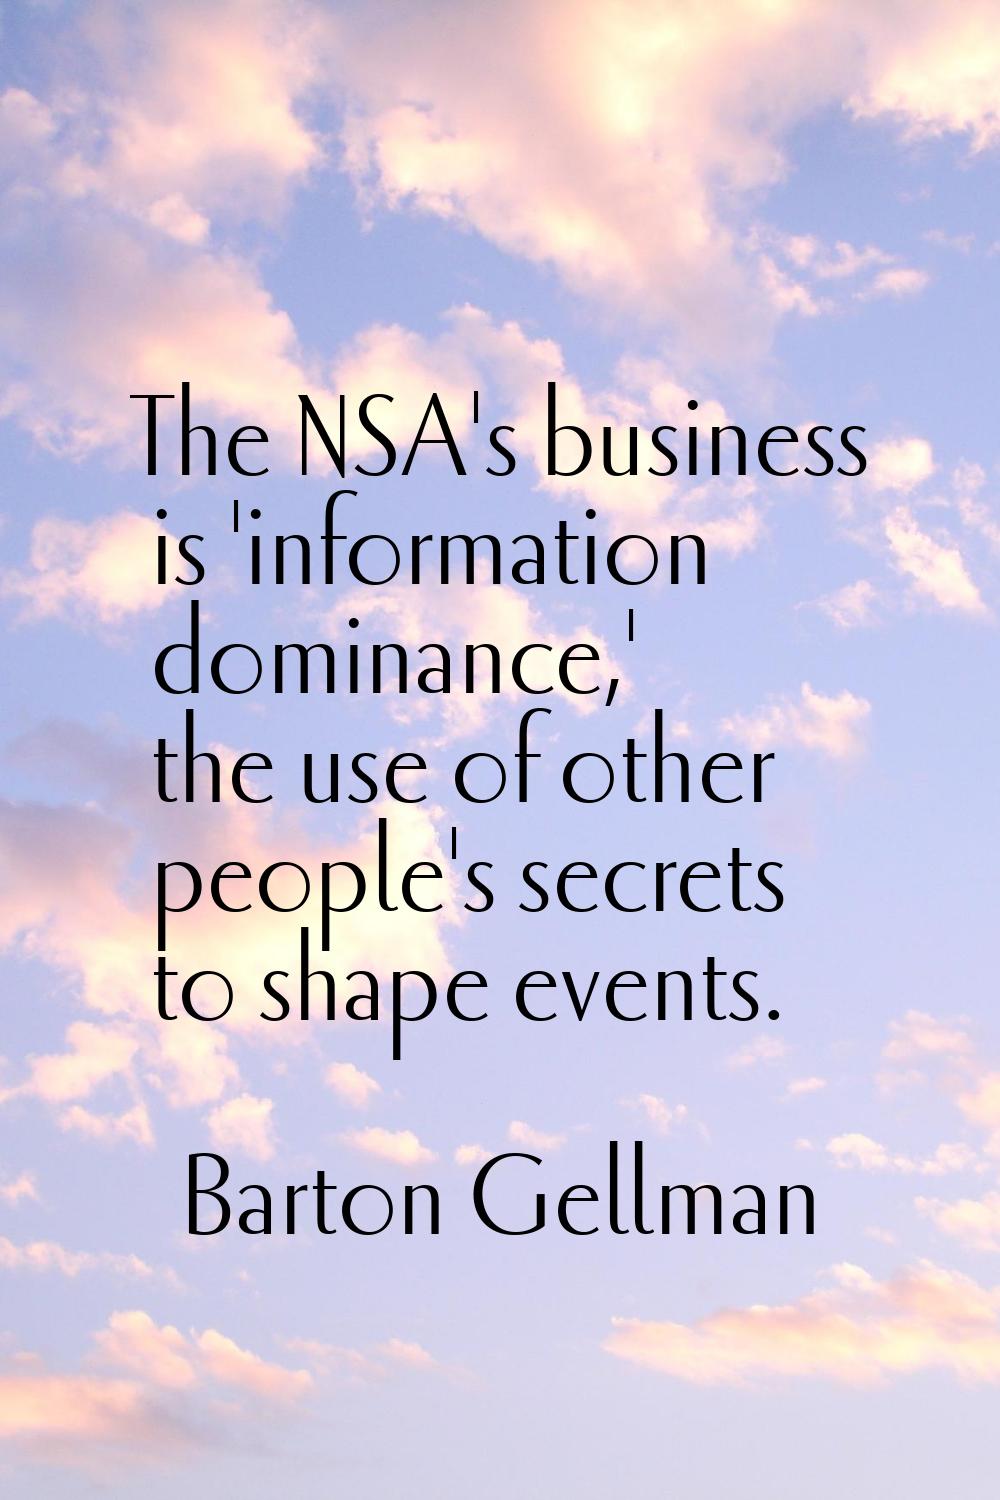 The NSA's business is 'information dominance,' the use of other people's secrets to shape events.